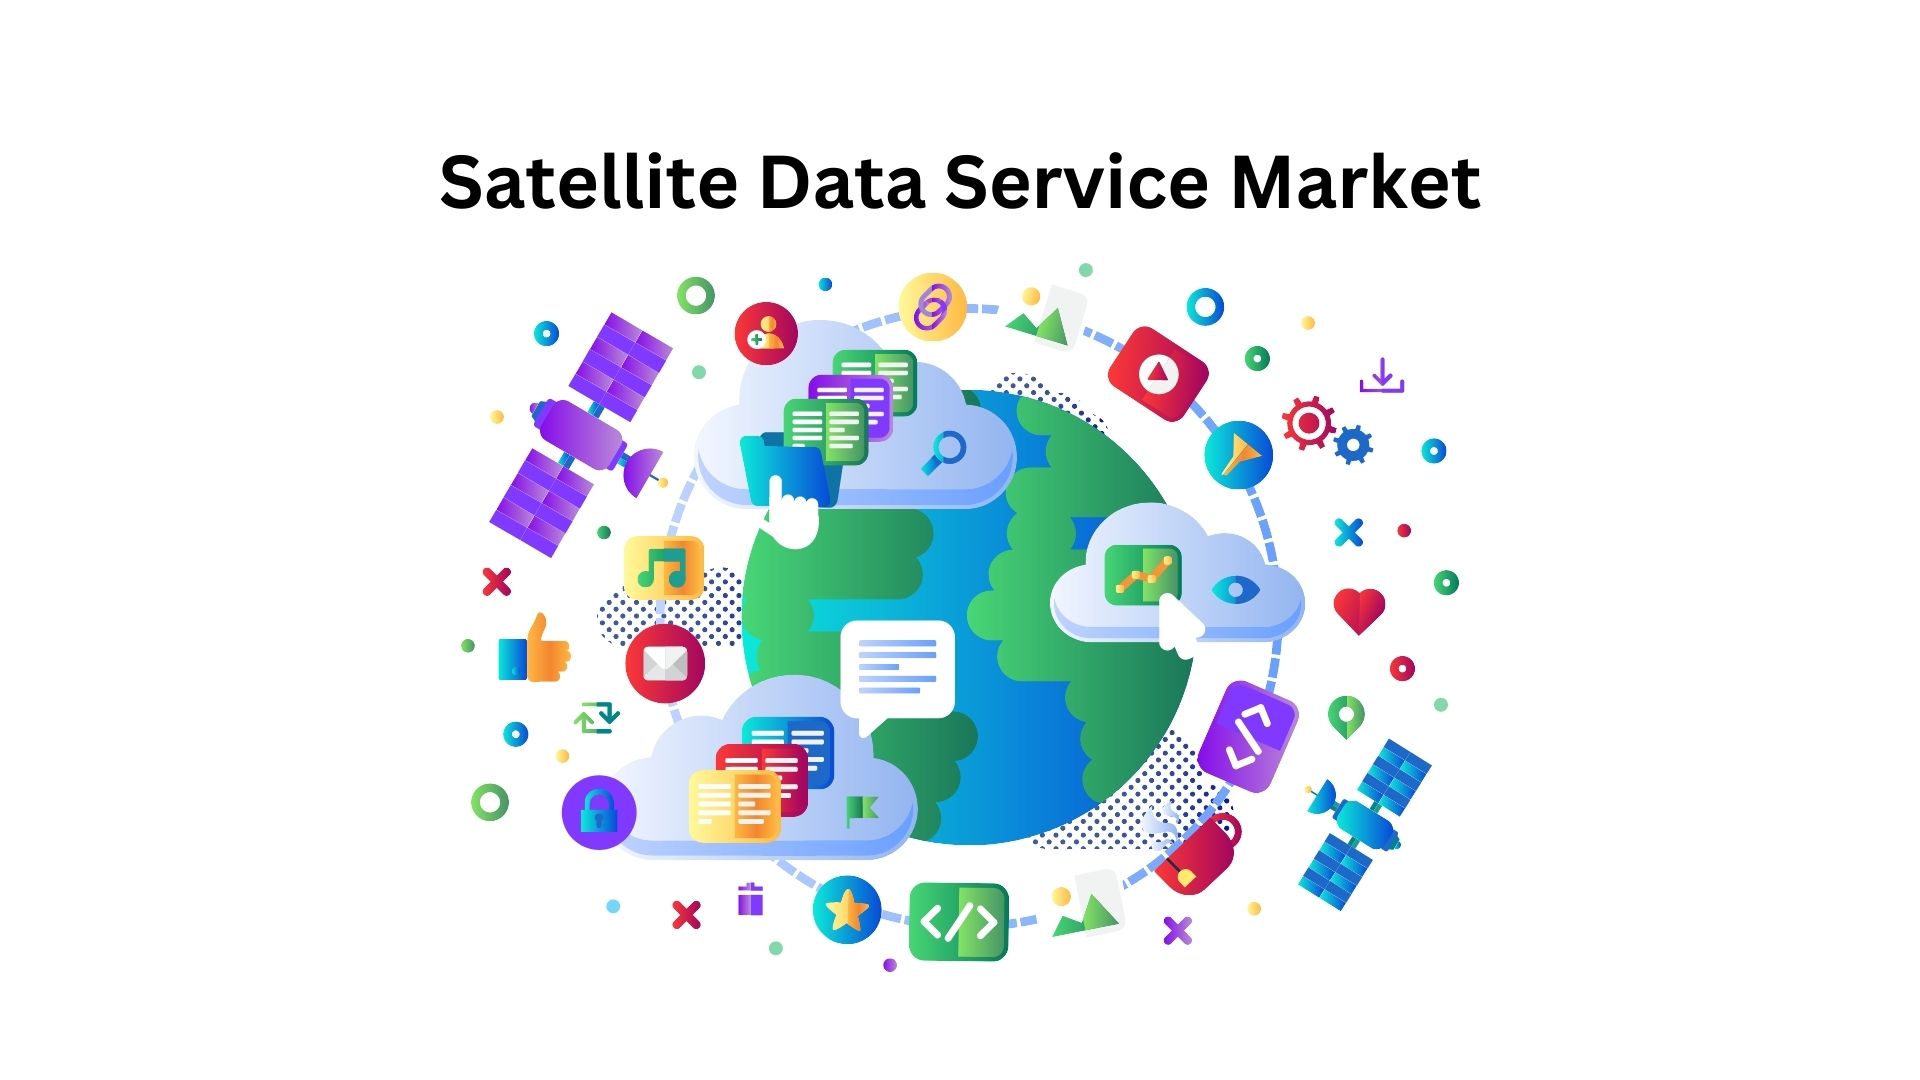 Satellite Data Service Market is expected to reach USD 85.8 Bn by 2033